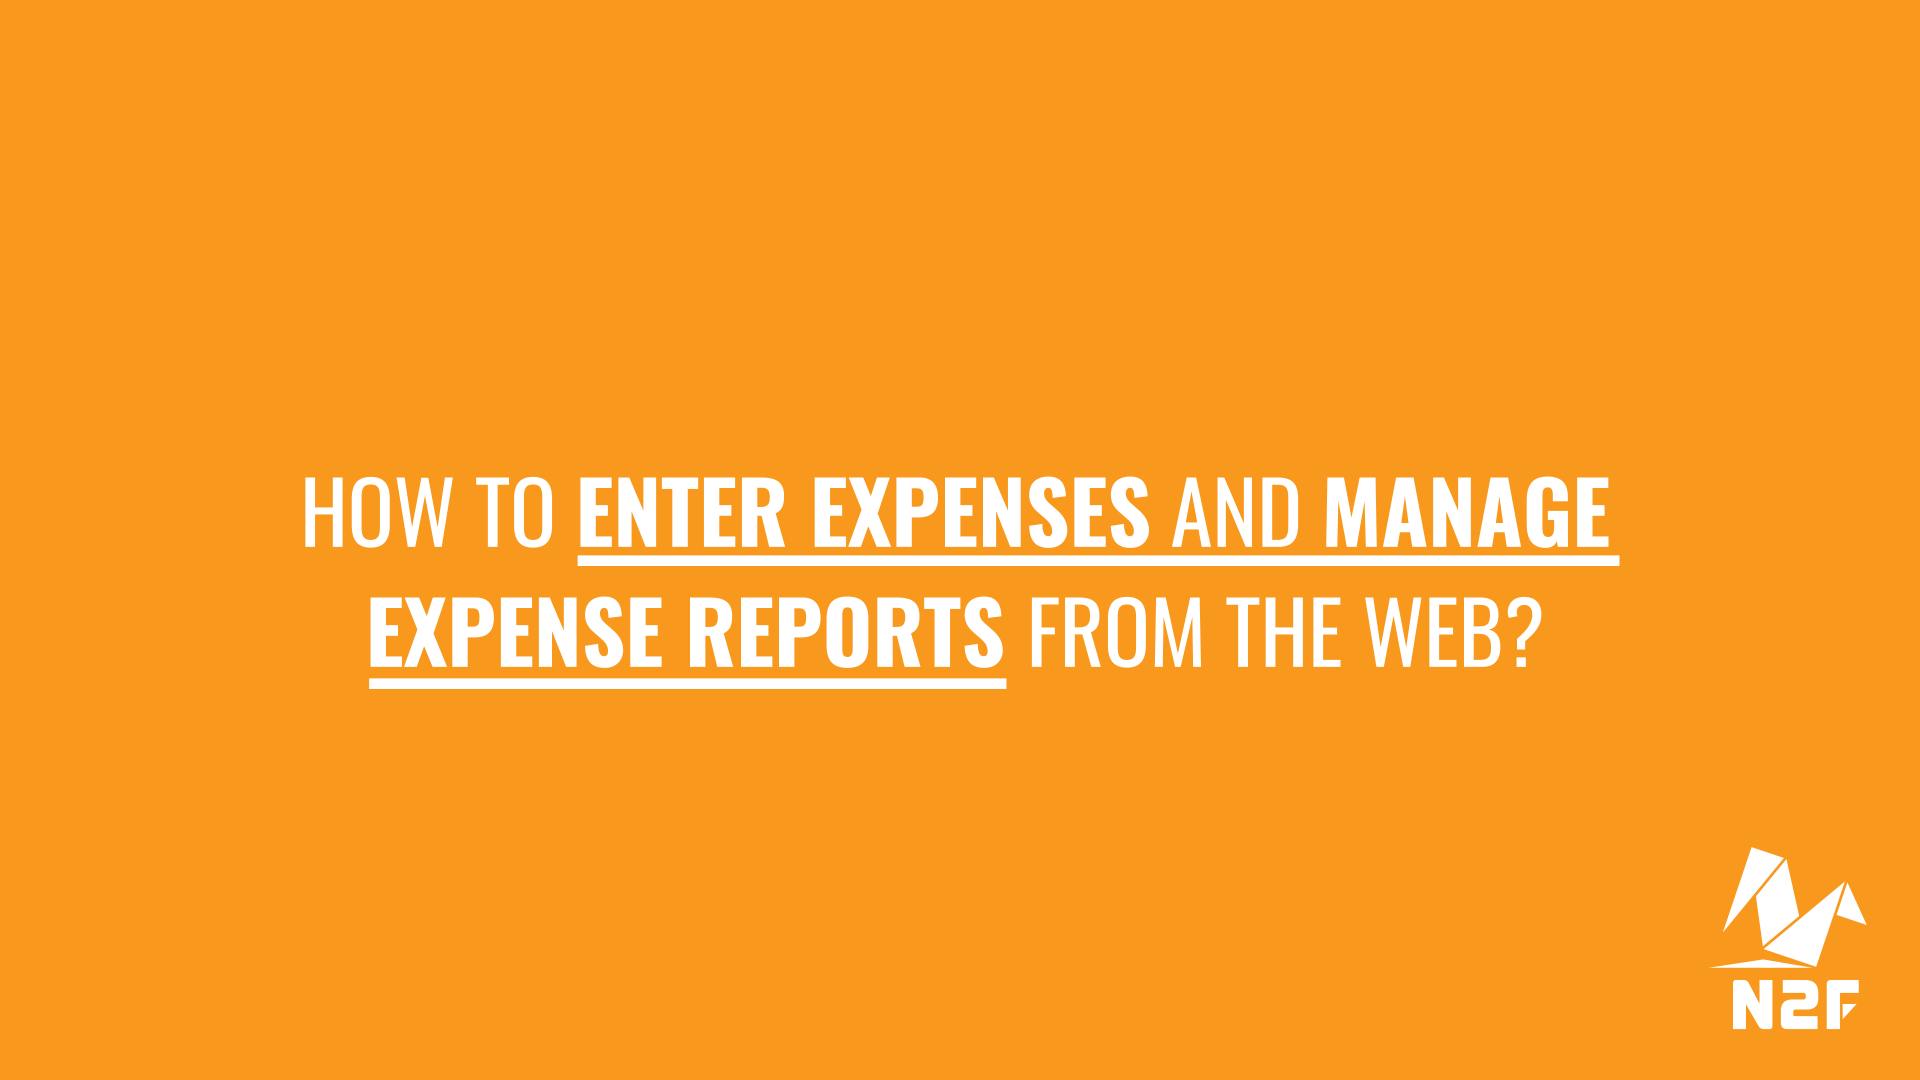 How to enter expenses and manage expense reports from the web?